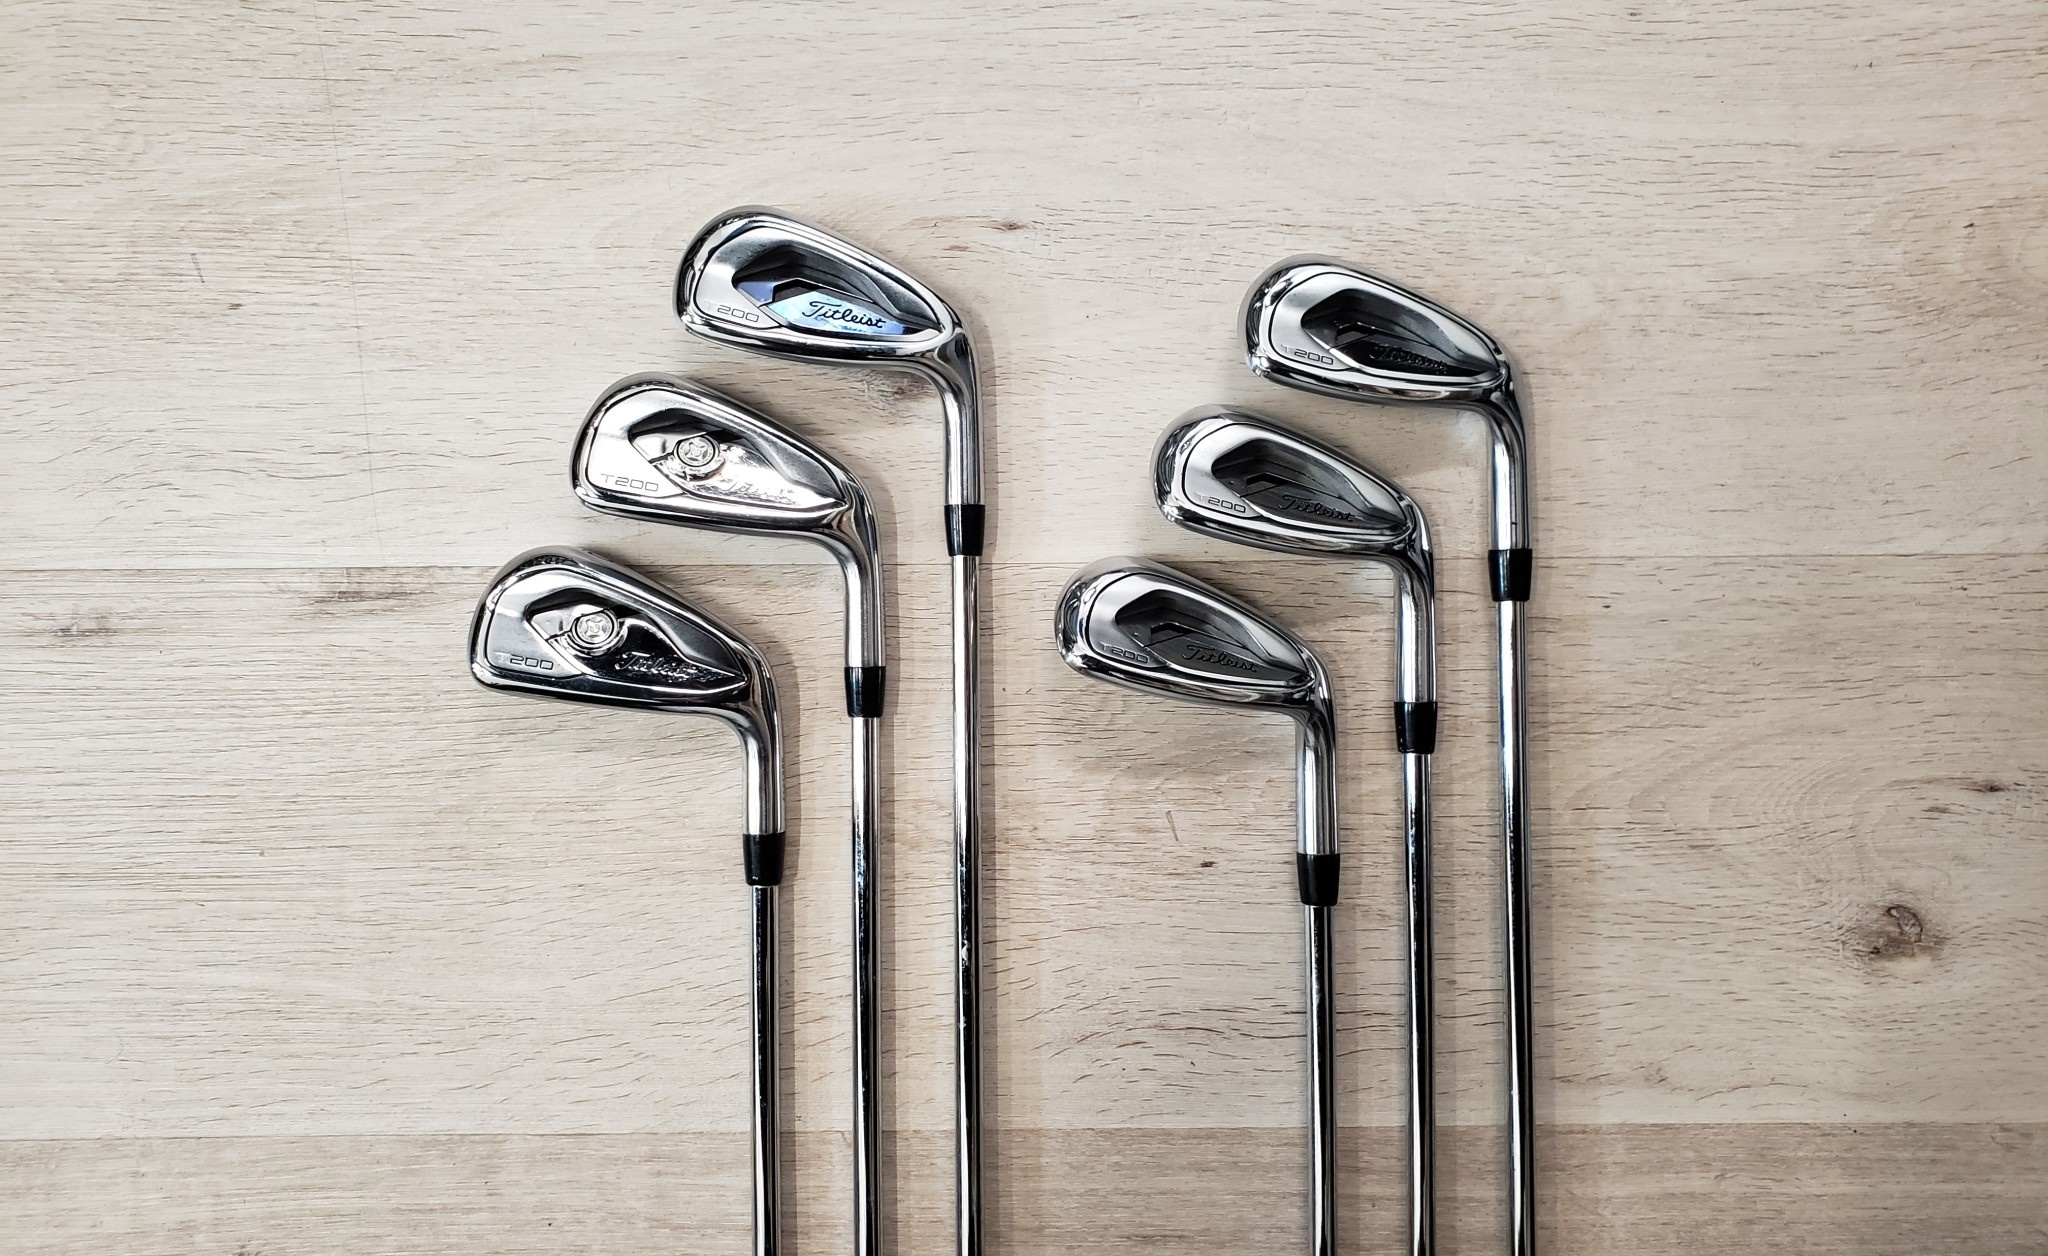 (Pre-owned) Titleist T200 Iron Set 6-PW, 48* AMT Red Regular Flex 